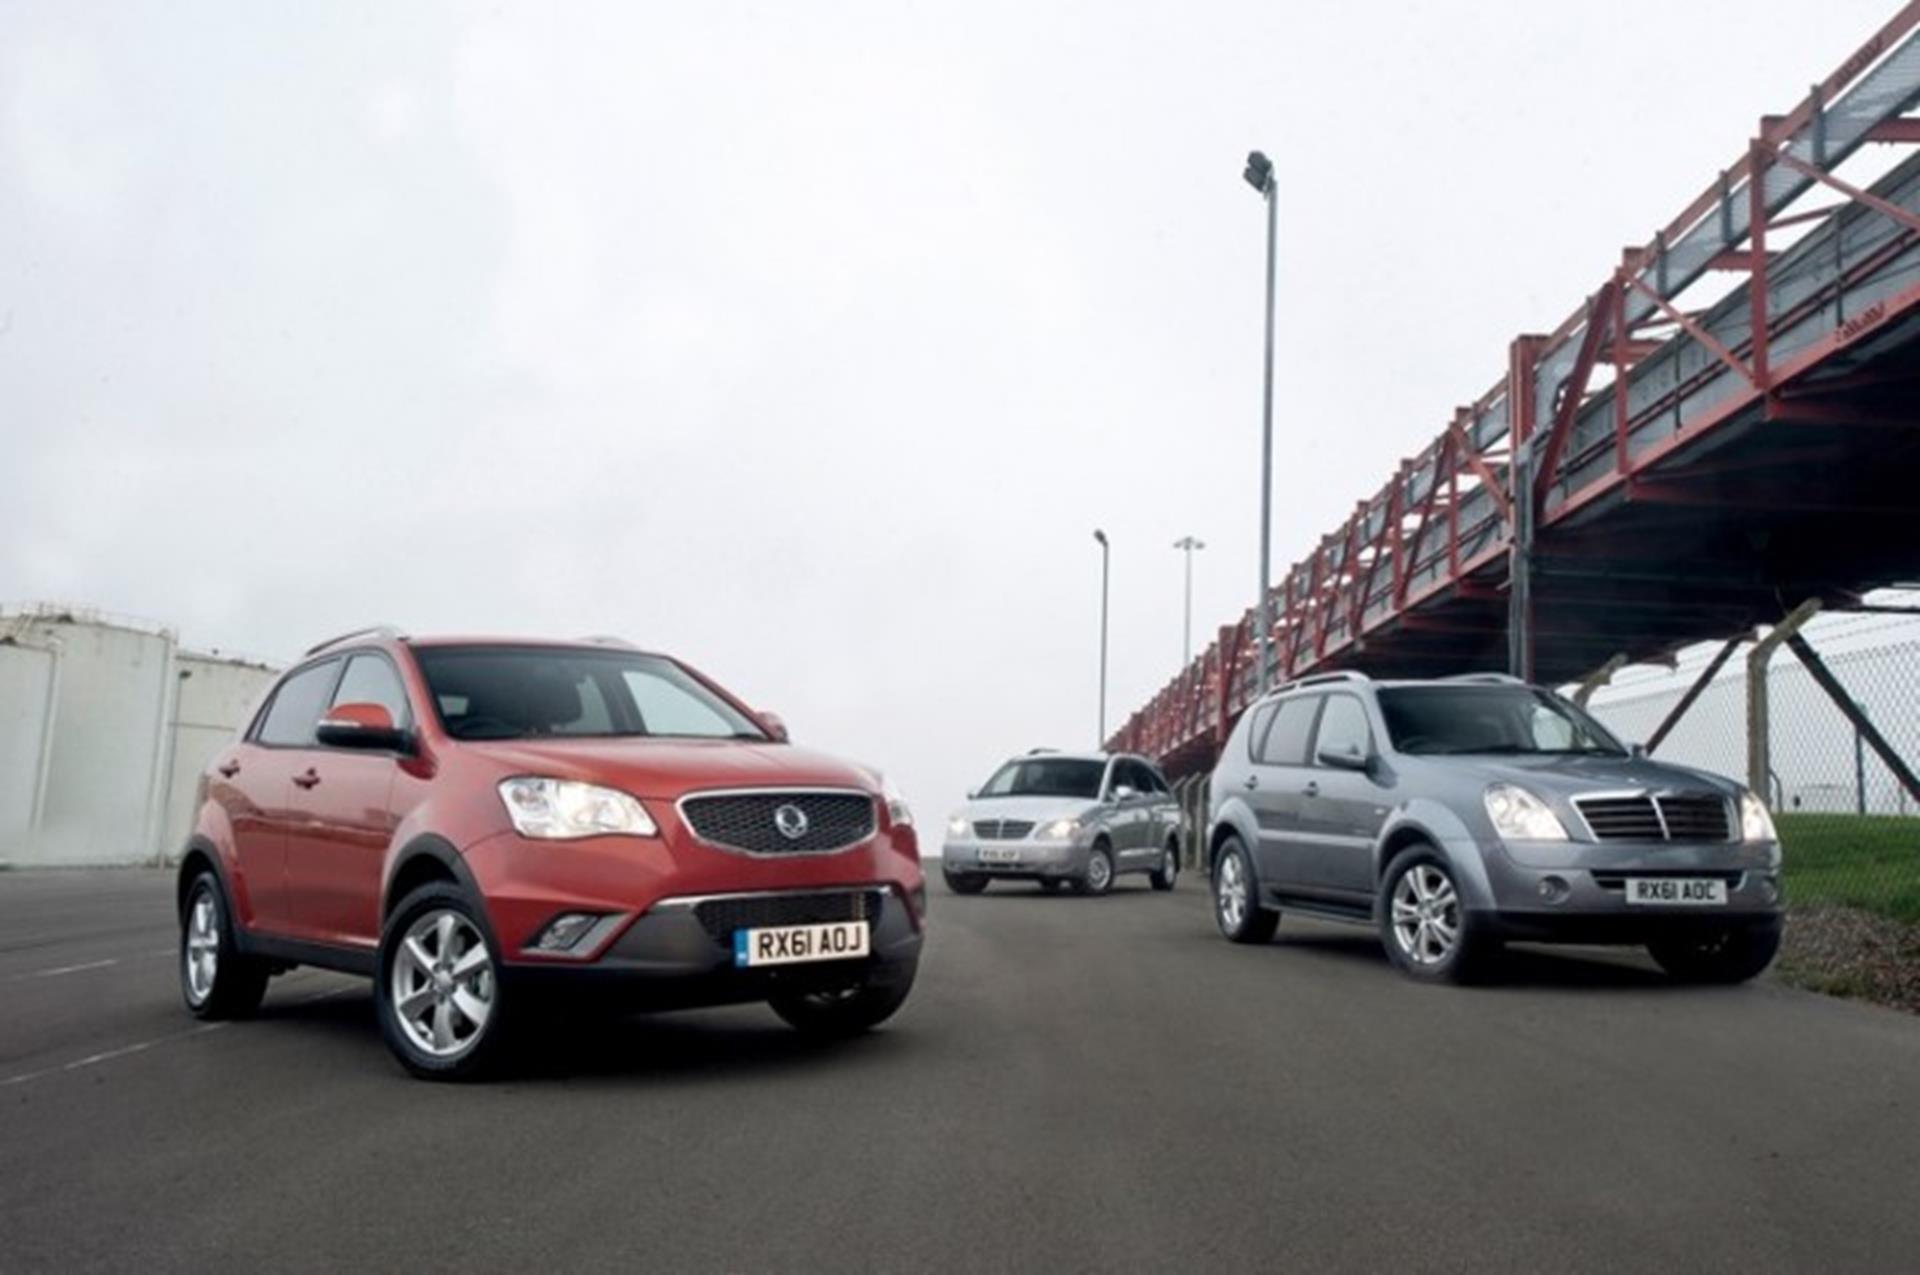 SSANGYONG APPOINTS PAT KIRK LTD AS ITS NEW SALES CENTRE FOR STRABANE